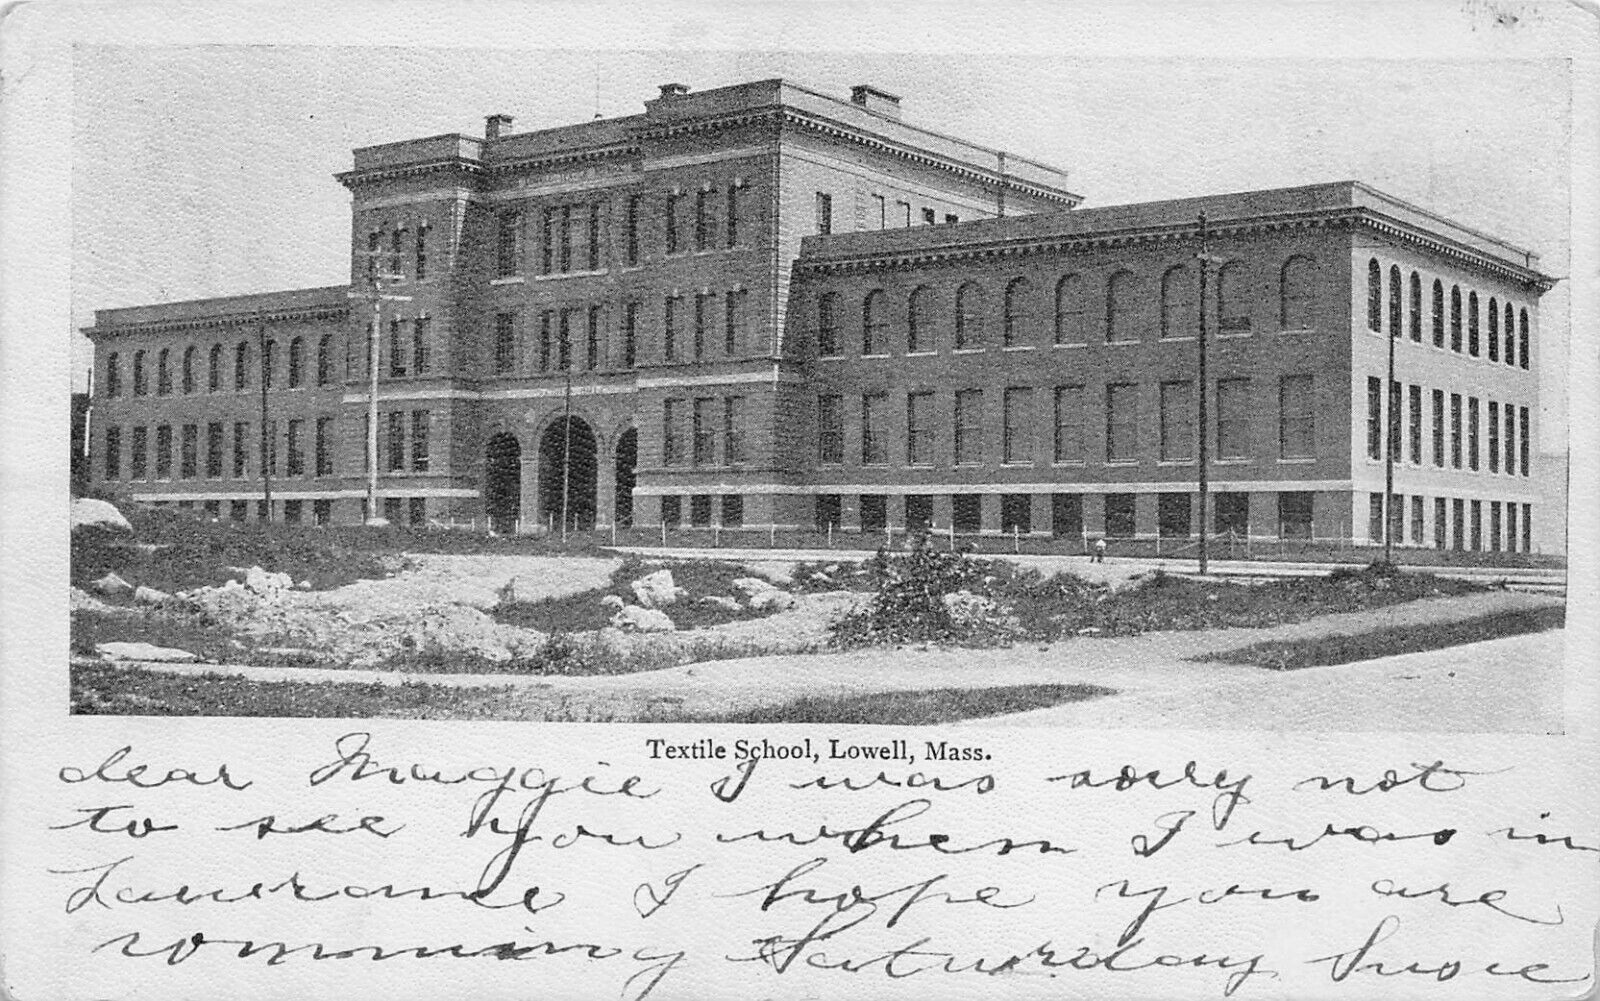 Textile School, Lowell, Massachusetts, Very Early Postcard, Used in 1906